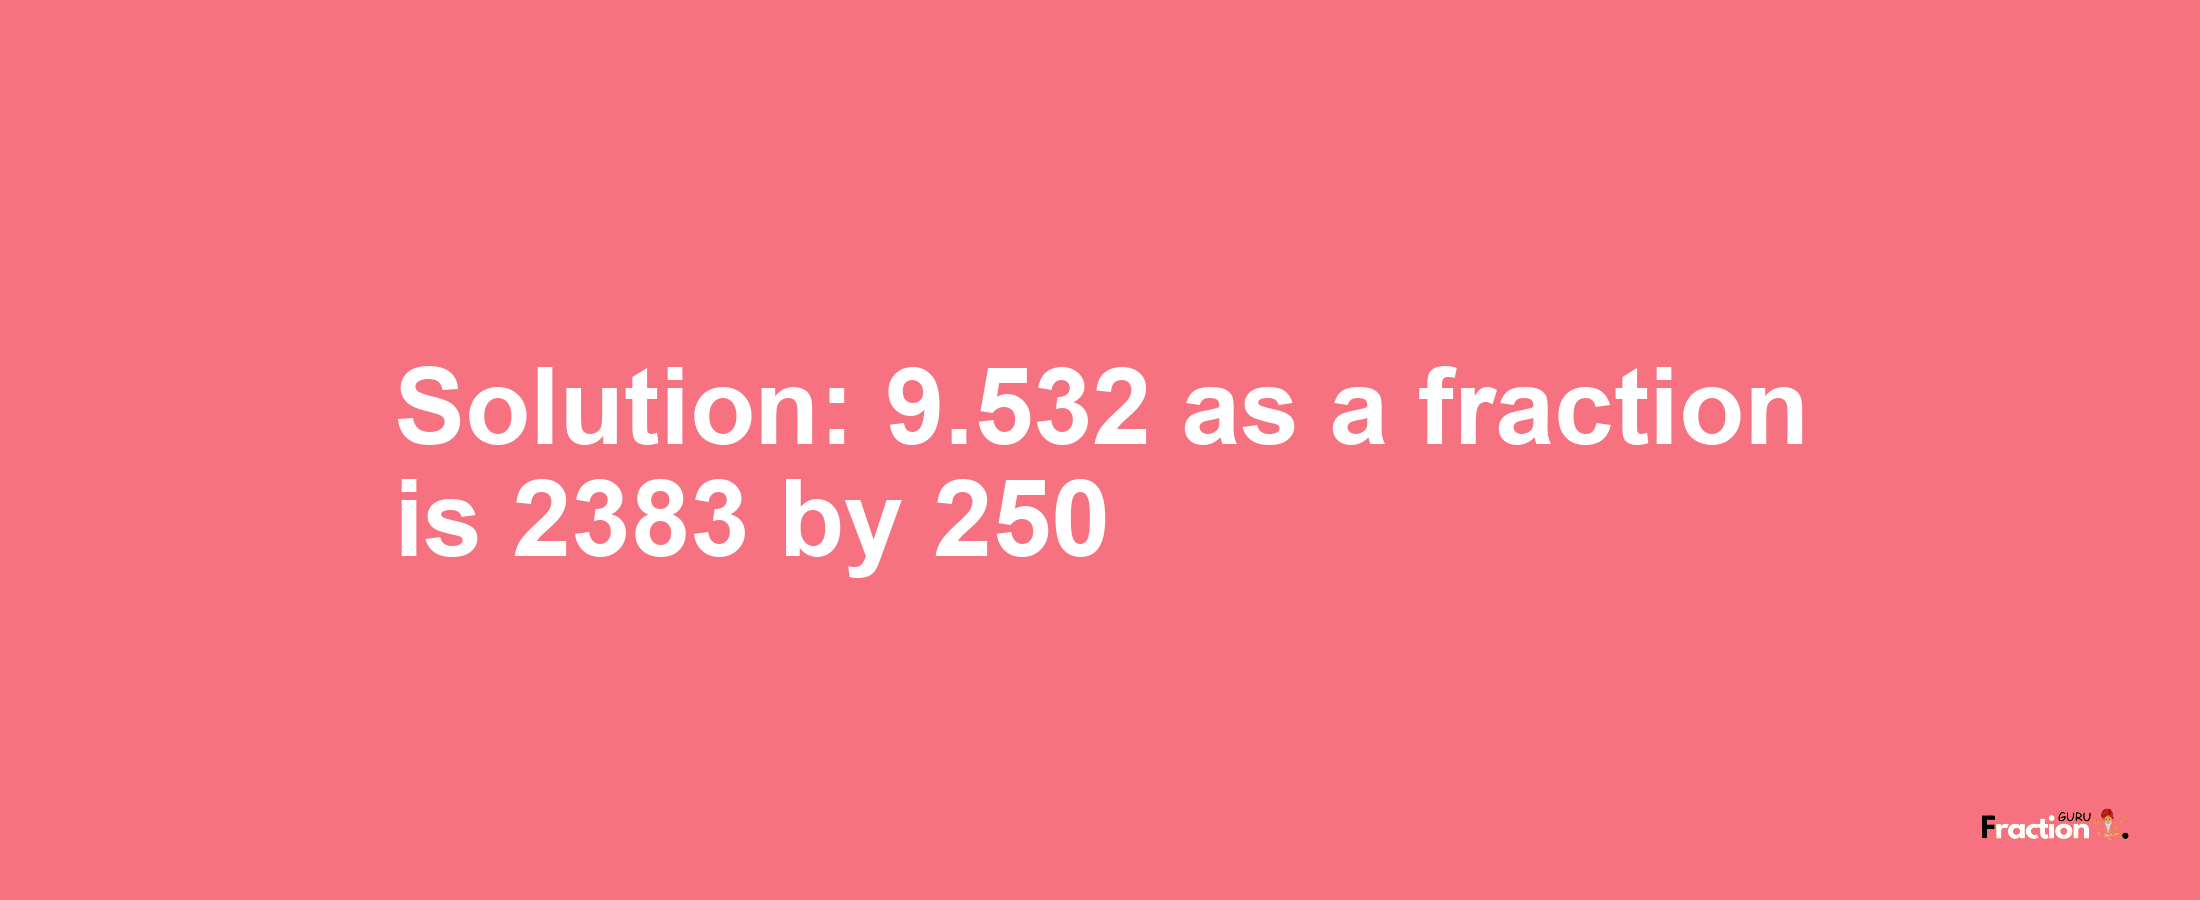 Solution:9.532 as a fraction is 2383/250